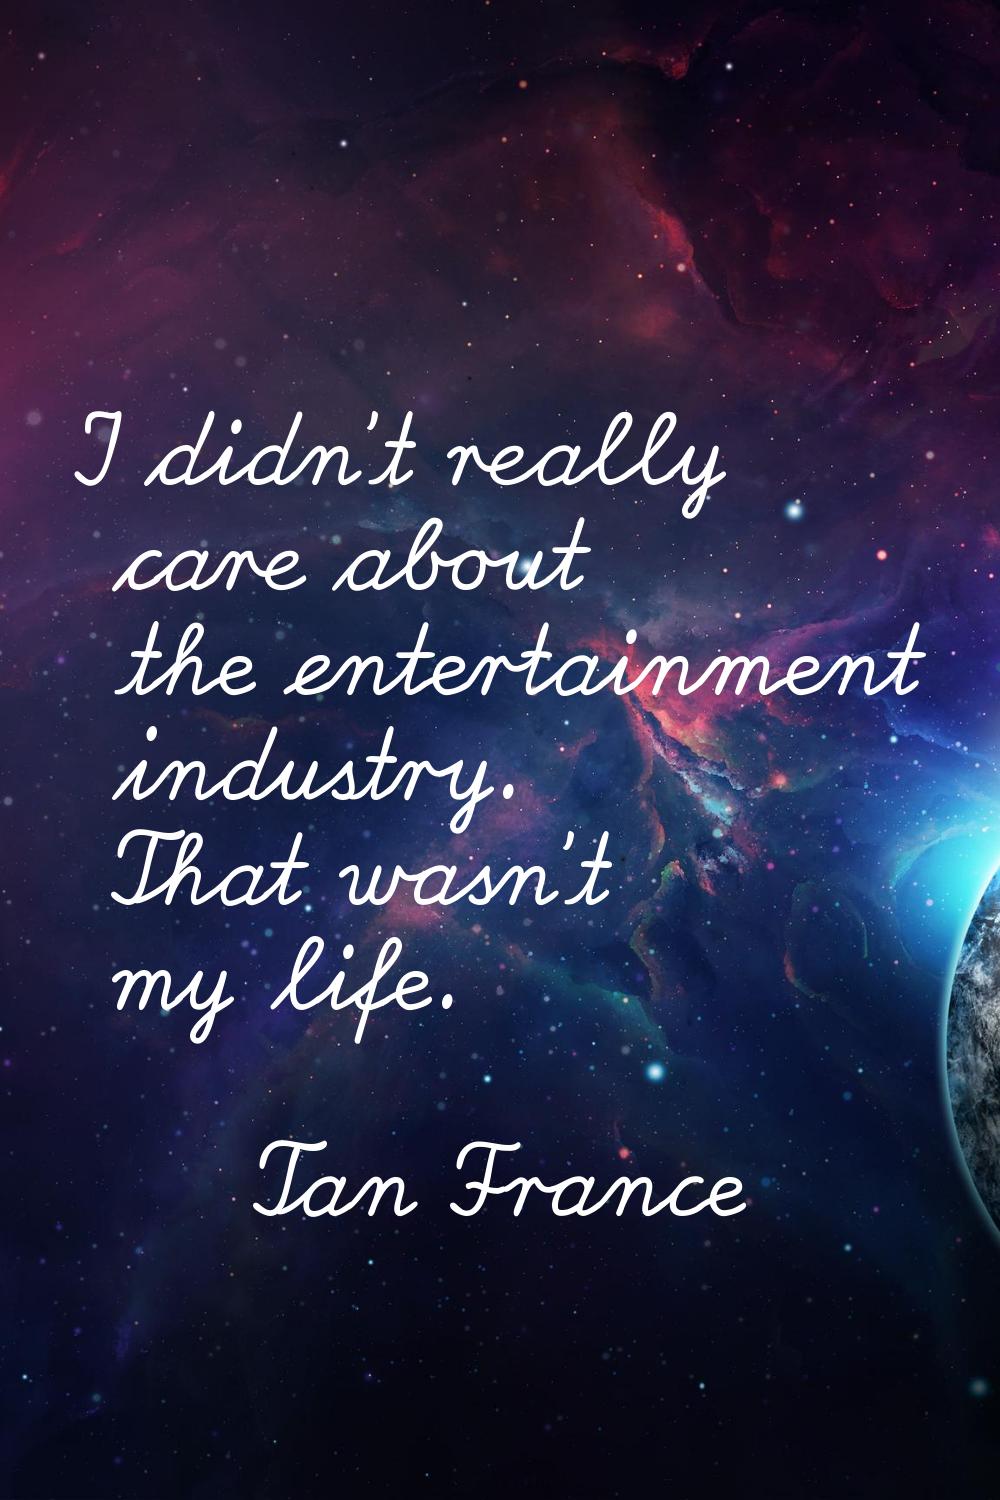 I didn't really care about the entertainment industry. That wasn't my life.